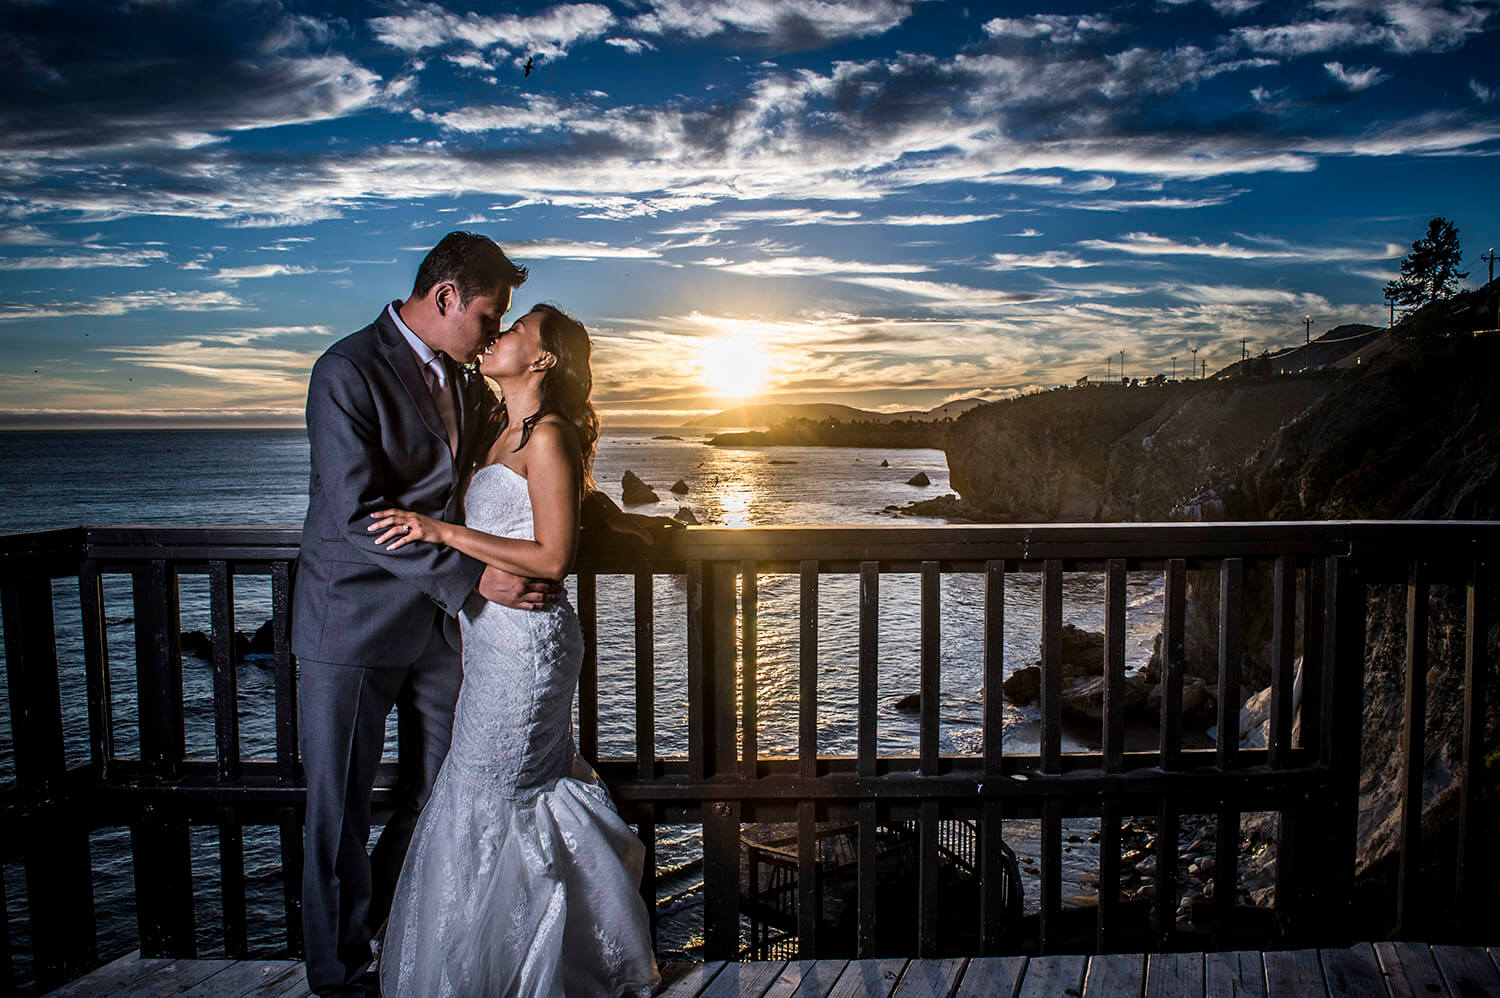 What wedding photo could be better than a wedding overlooking the beach?